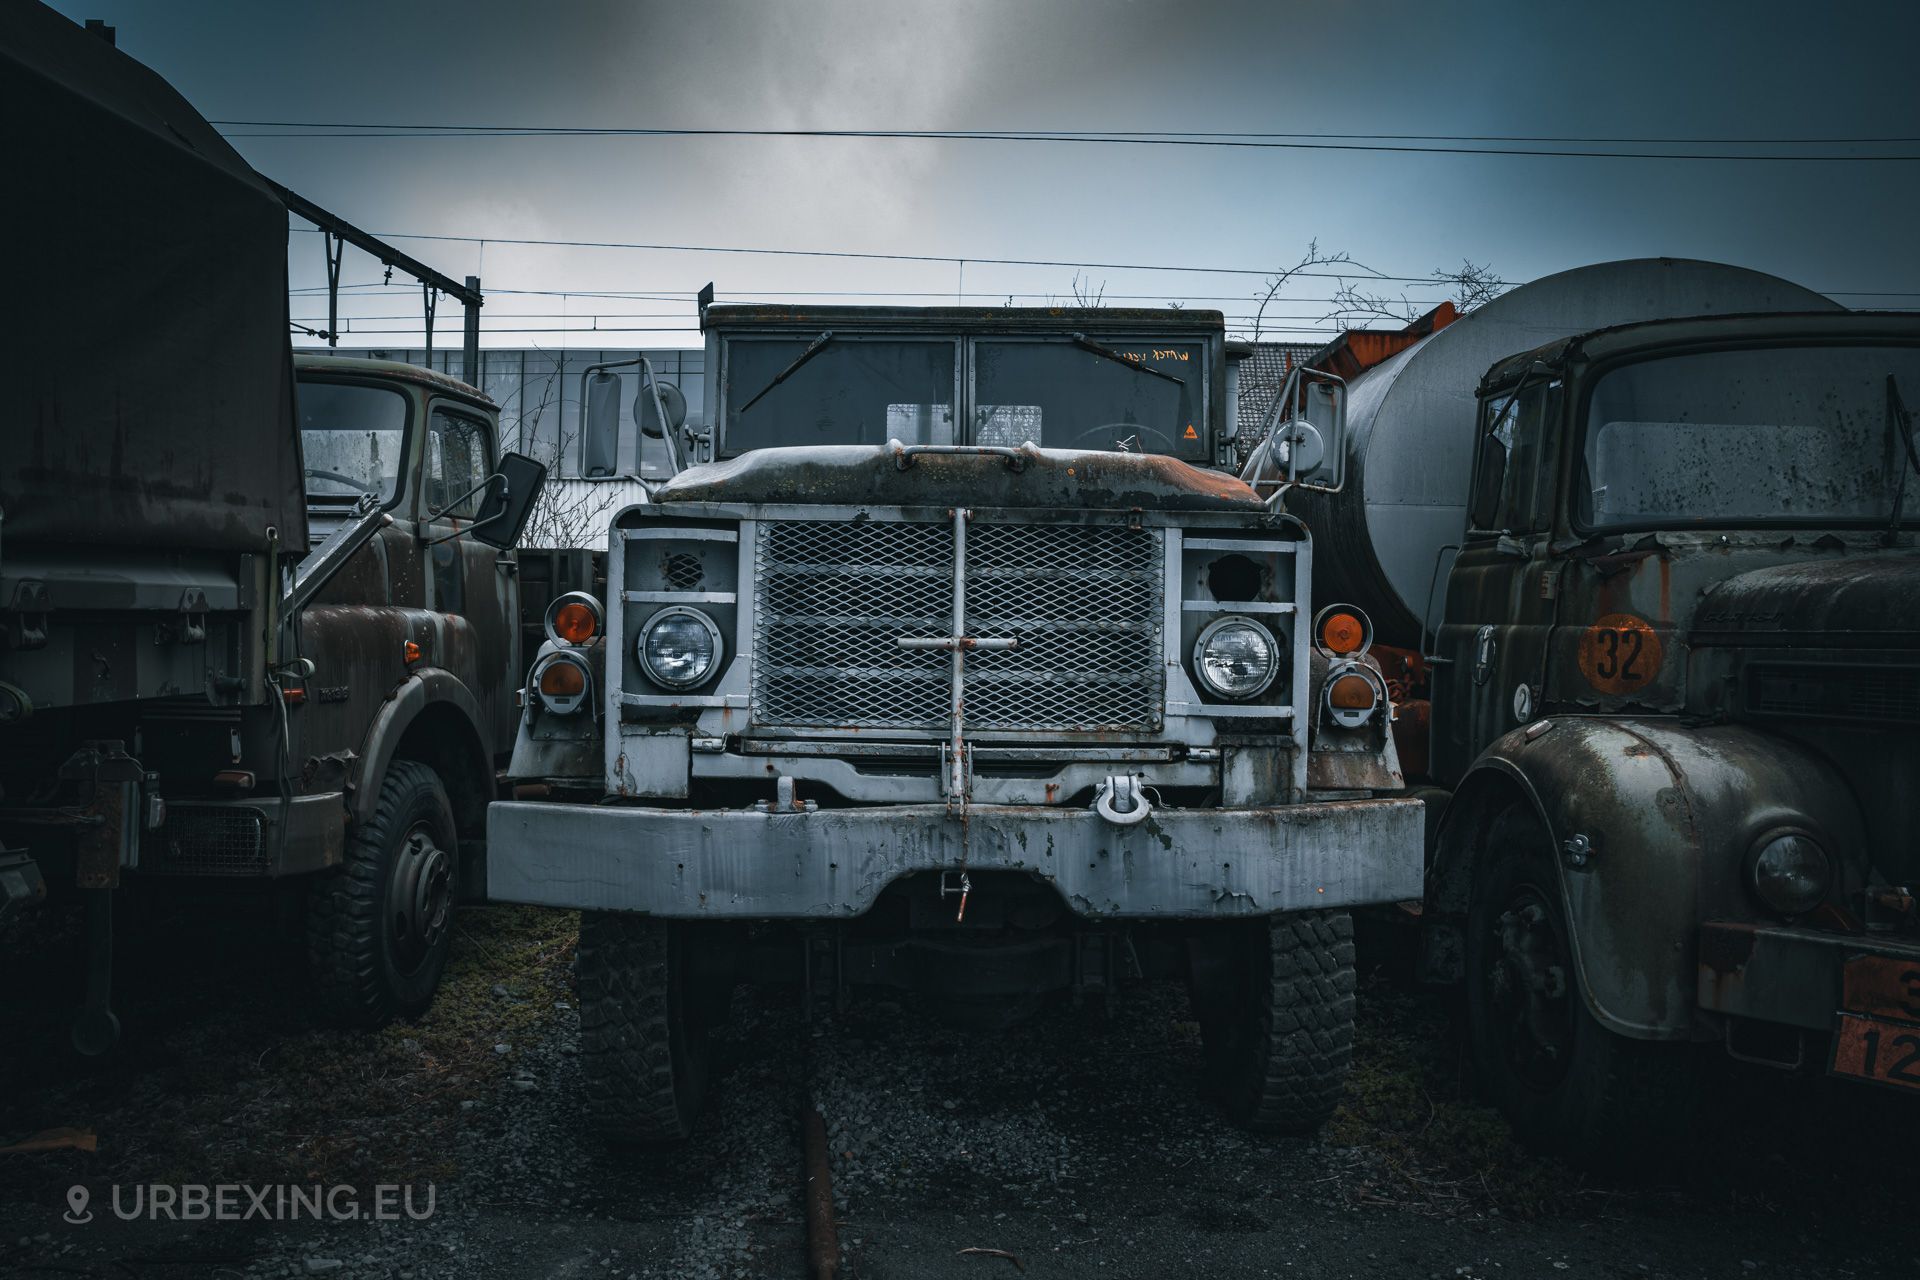 a photo of a military truck found during urban exploring